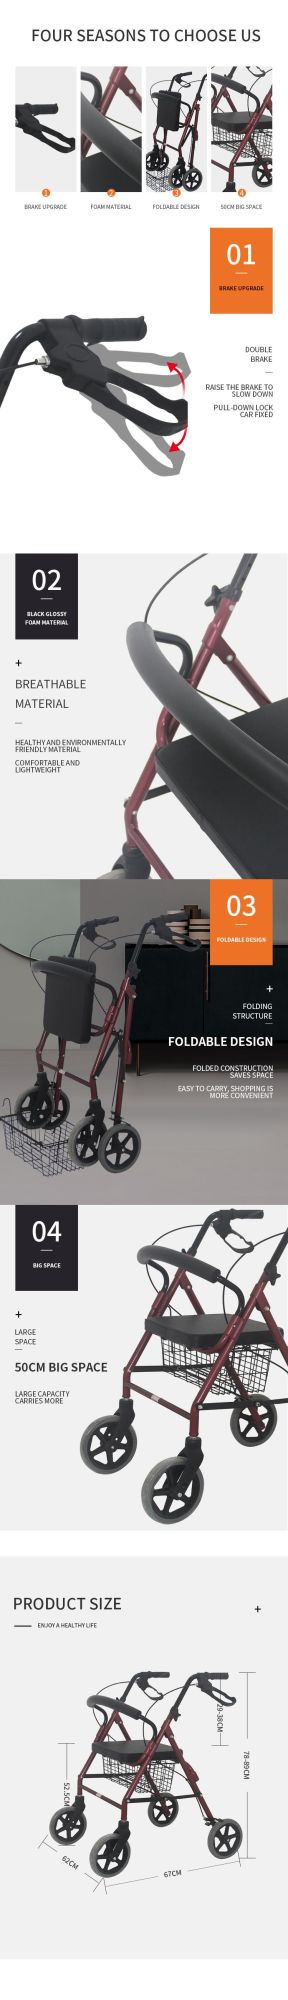 Folding Mobility Aid Portable Elderly Adjustable Shopping Medical Outdoor Aluminium Walker Rollator with Seat